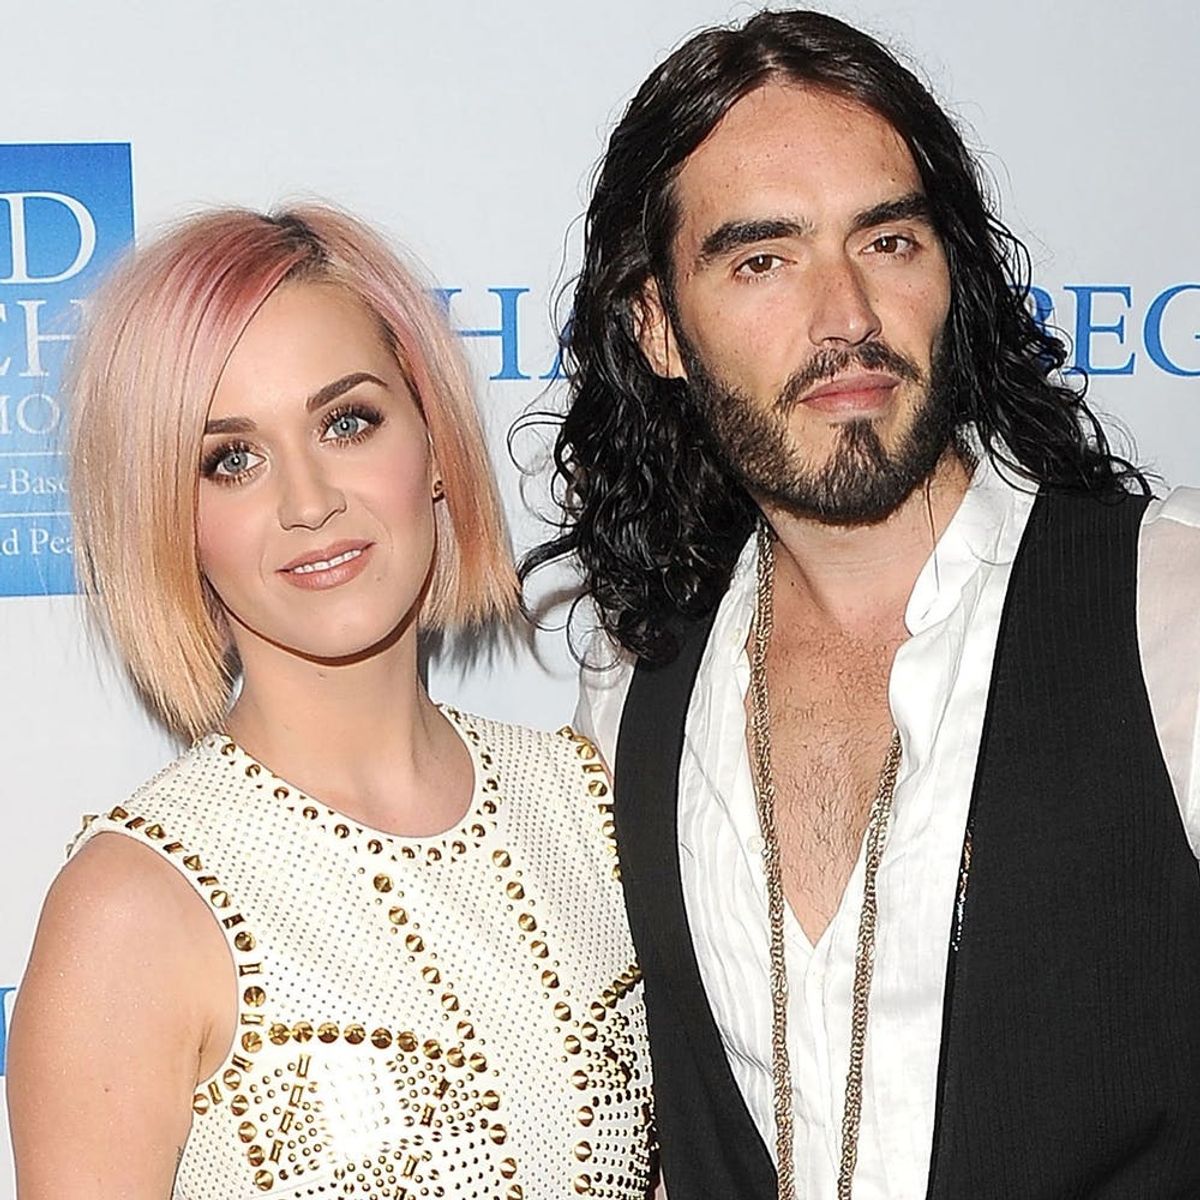 Russell Brand Has Nothing But Nice Things to Say About His Marriage to Katy Perry